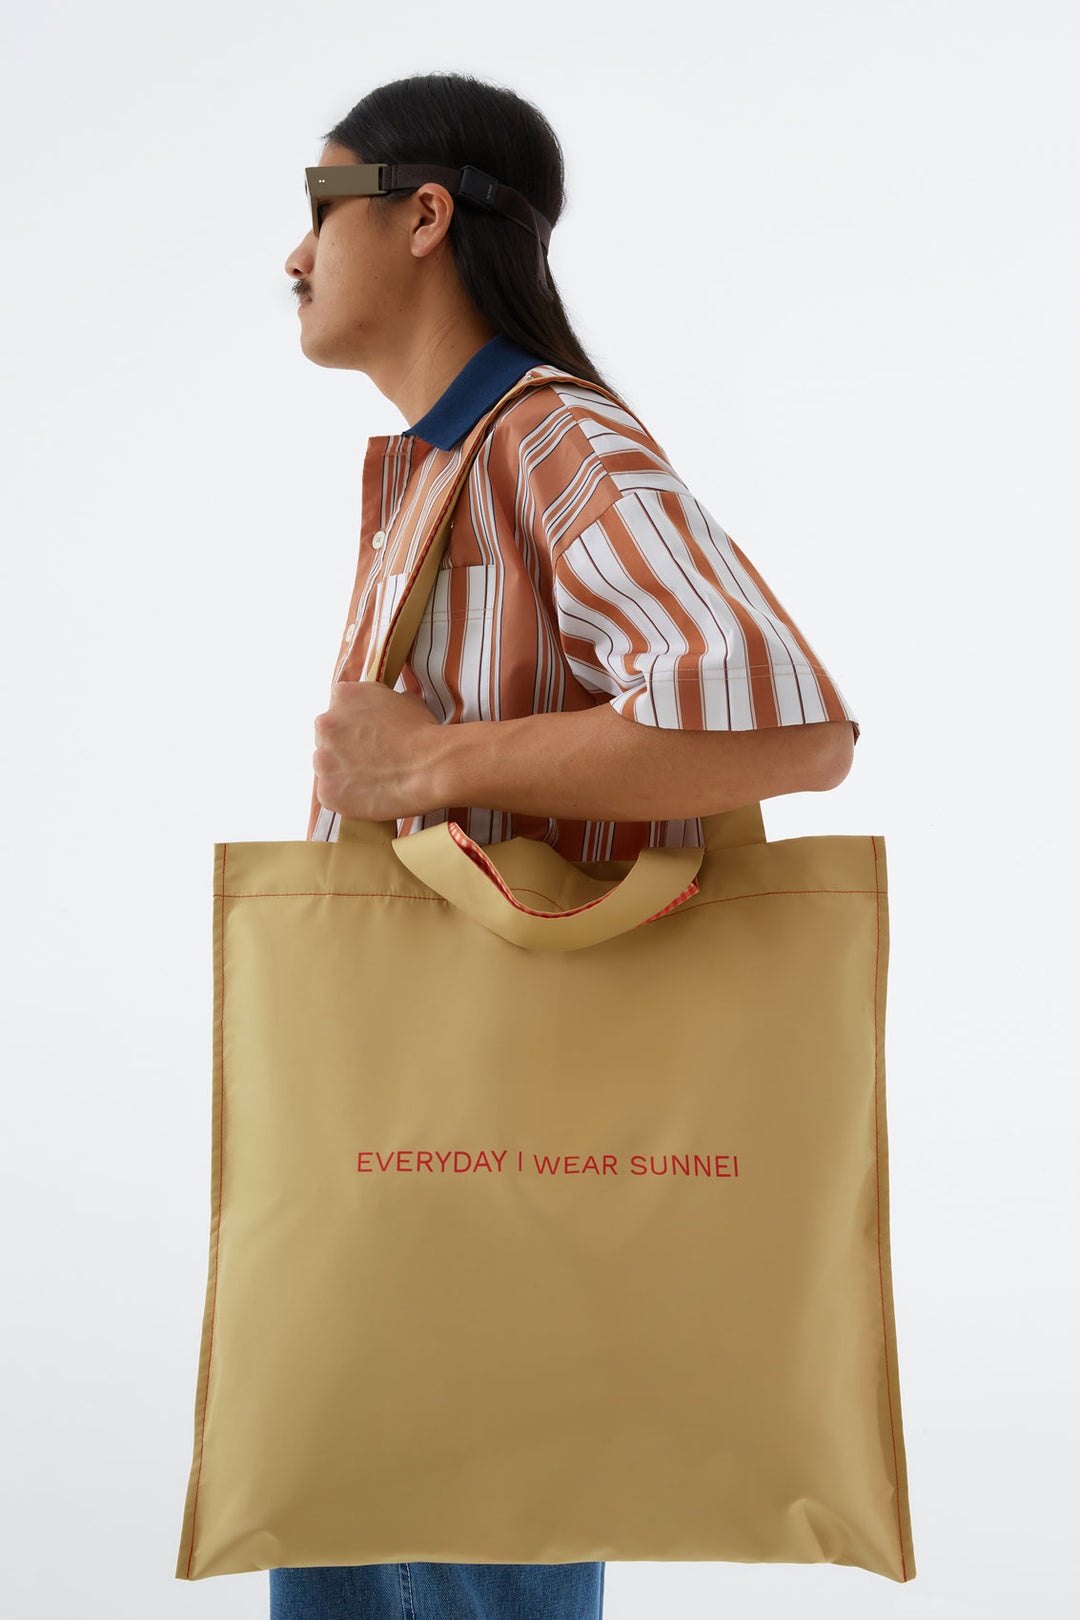 EVERYDAY I WEAR SUNNEI YELLOW TOTE BAG - 2